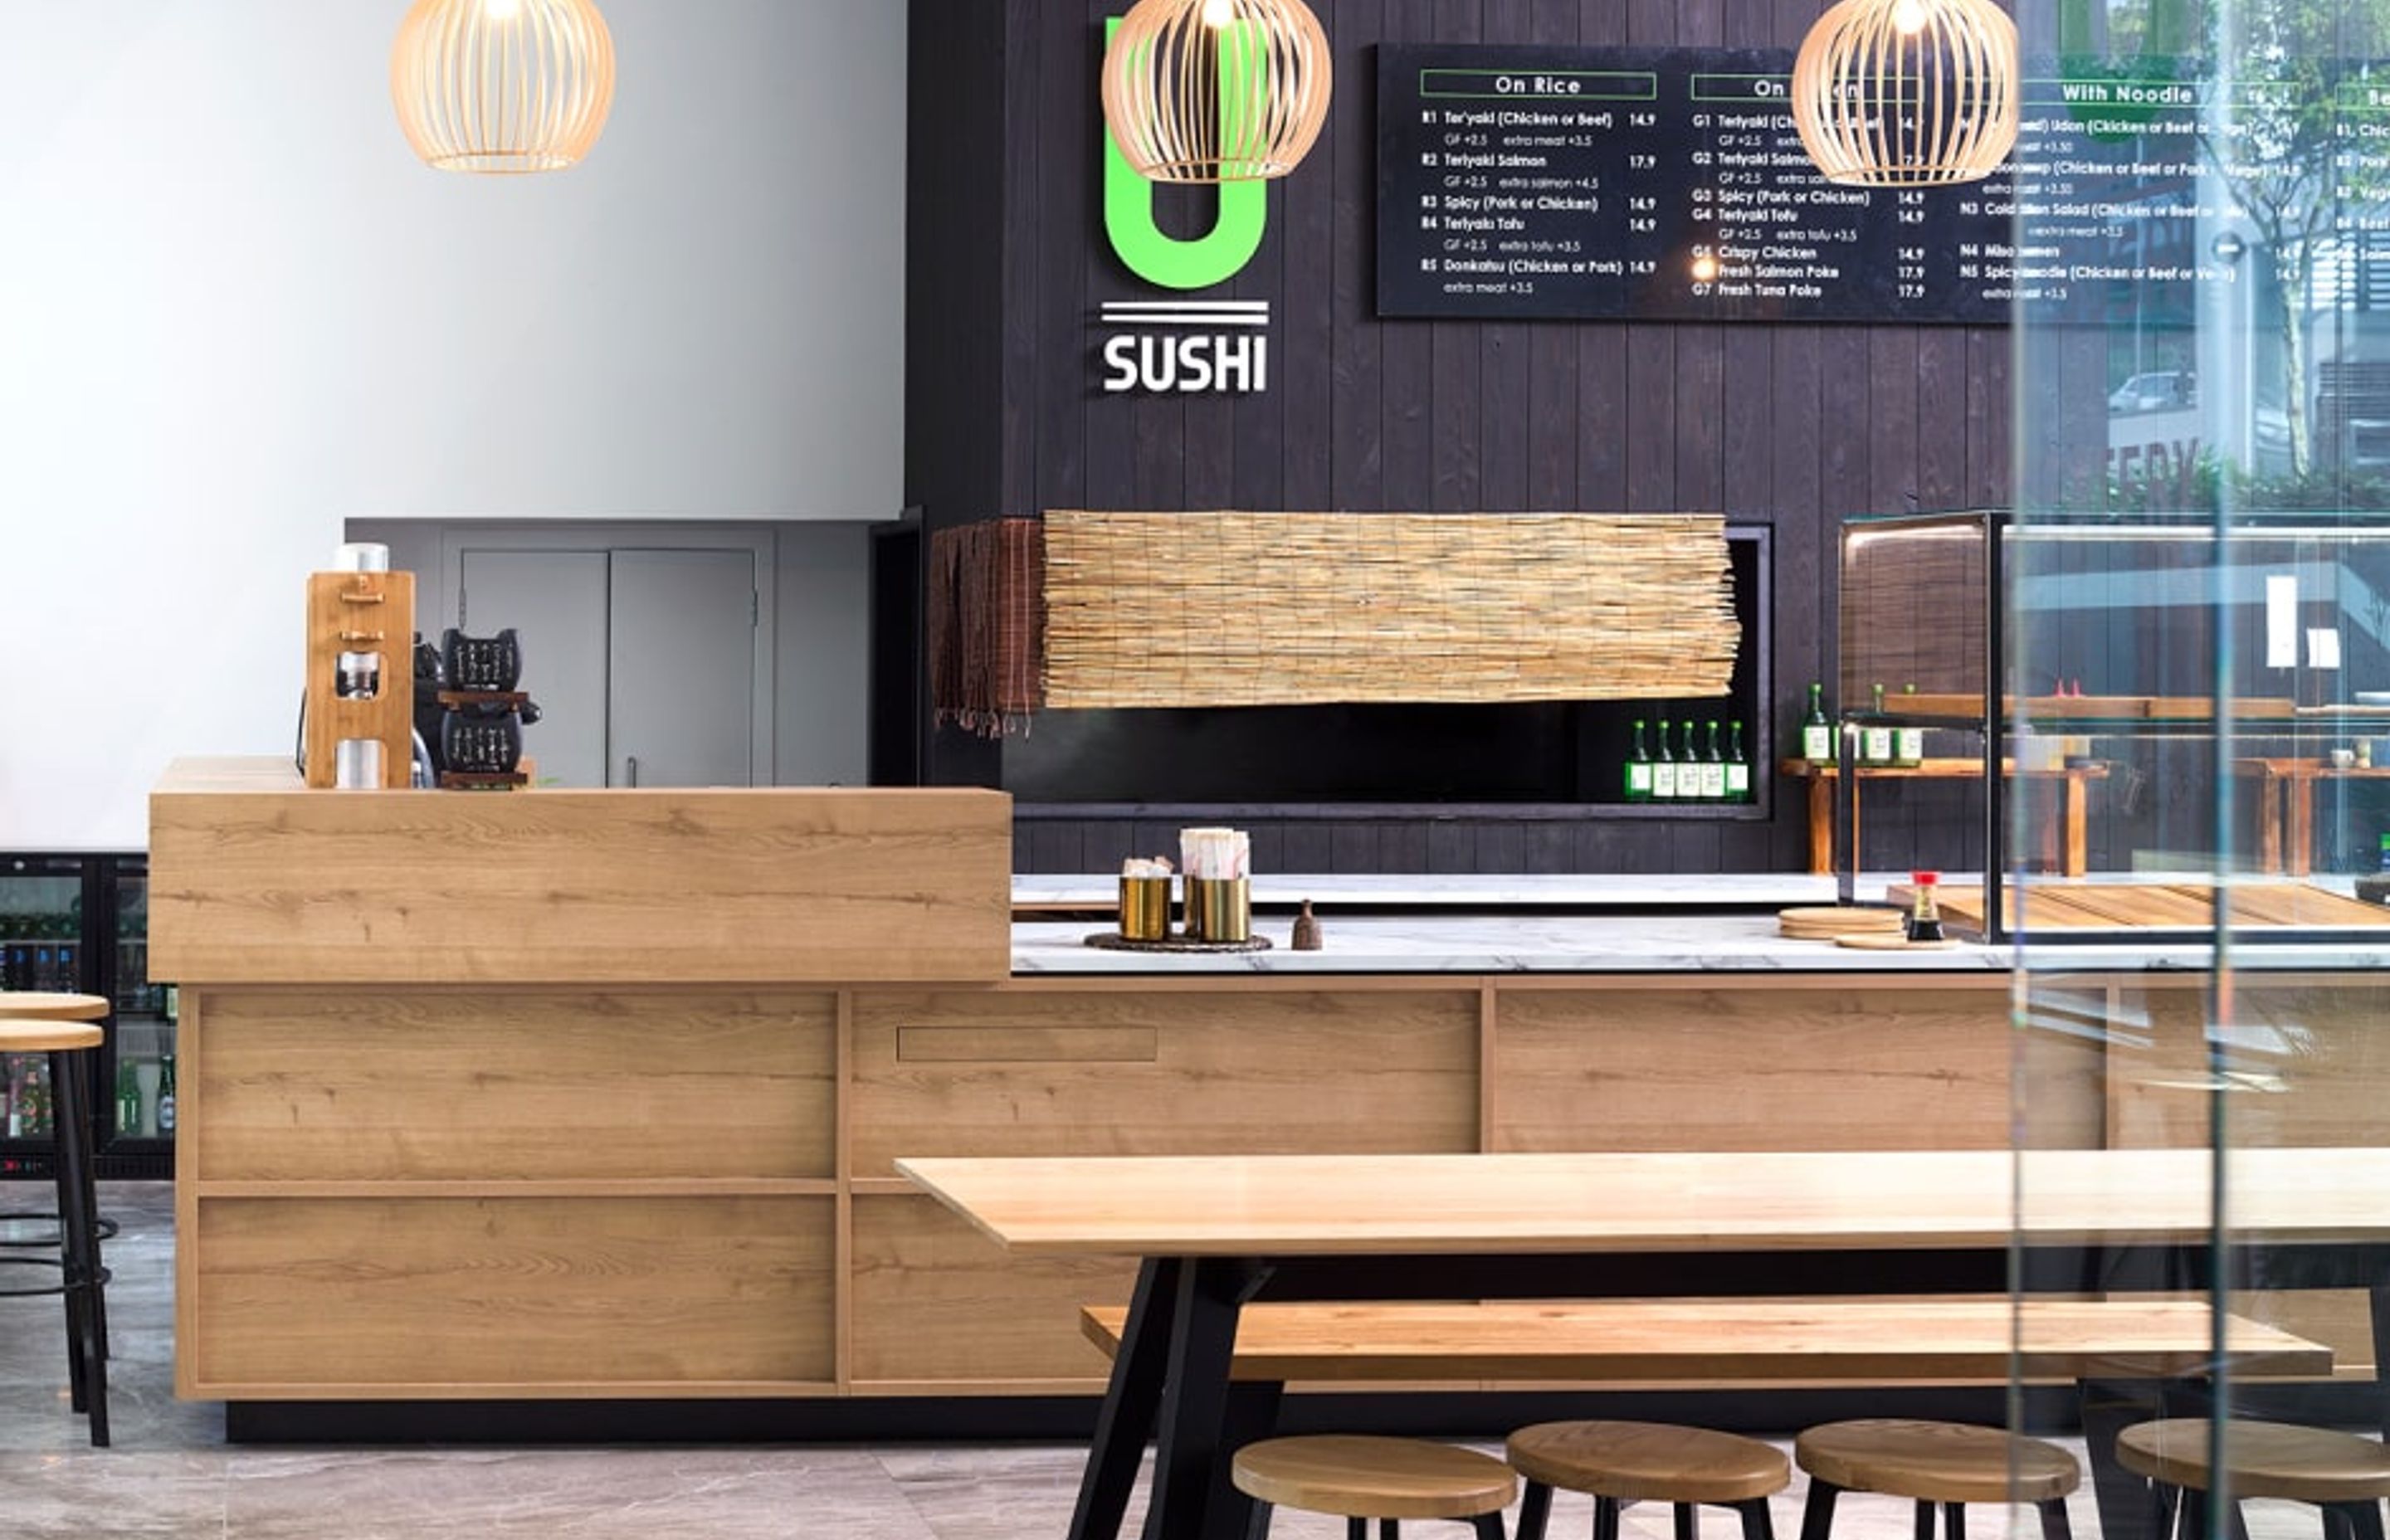 Modern Japanese: Going Above and Beyond for This Sushi Shop Fitout